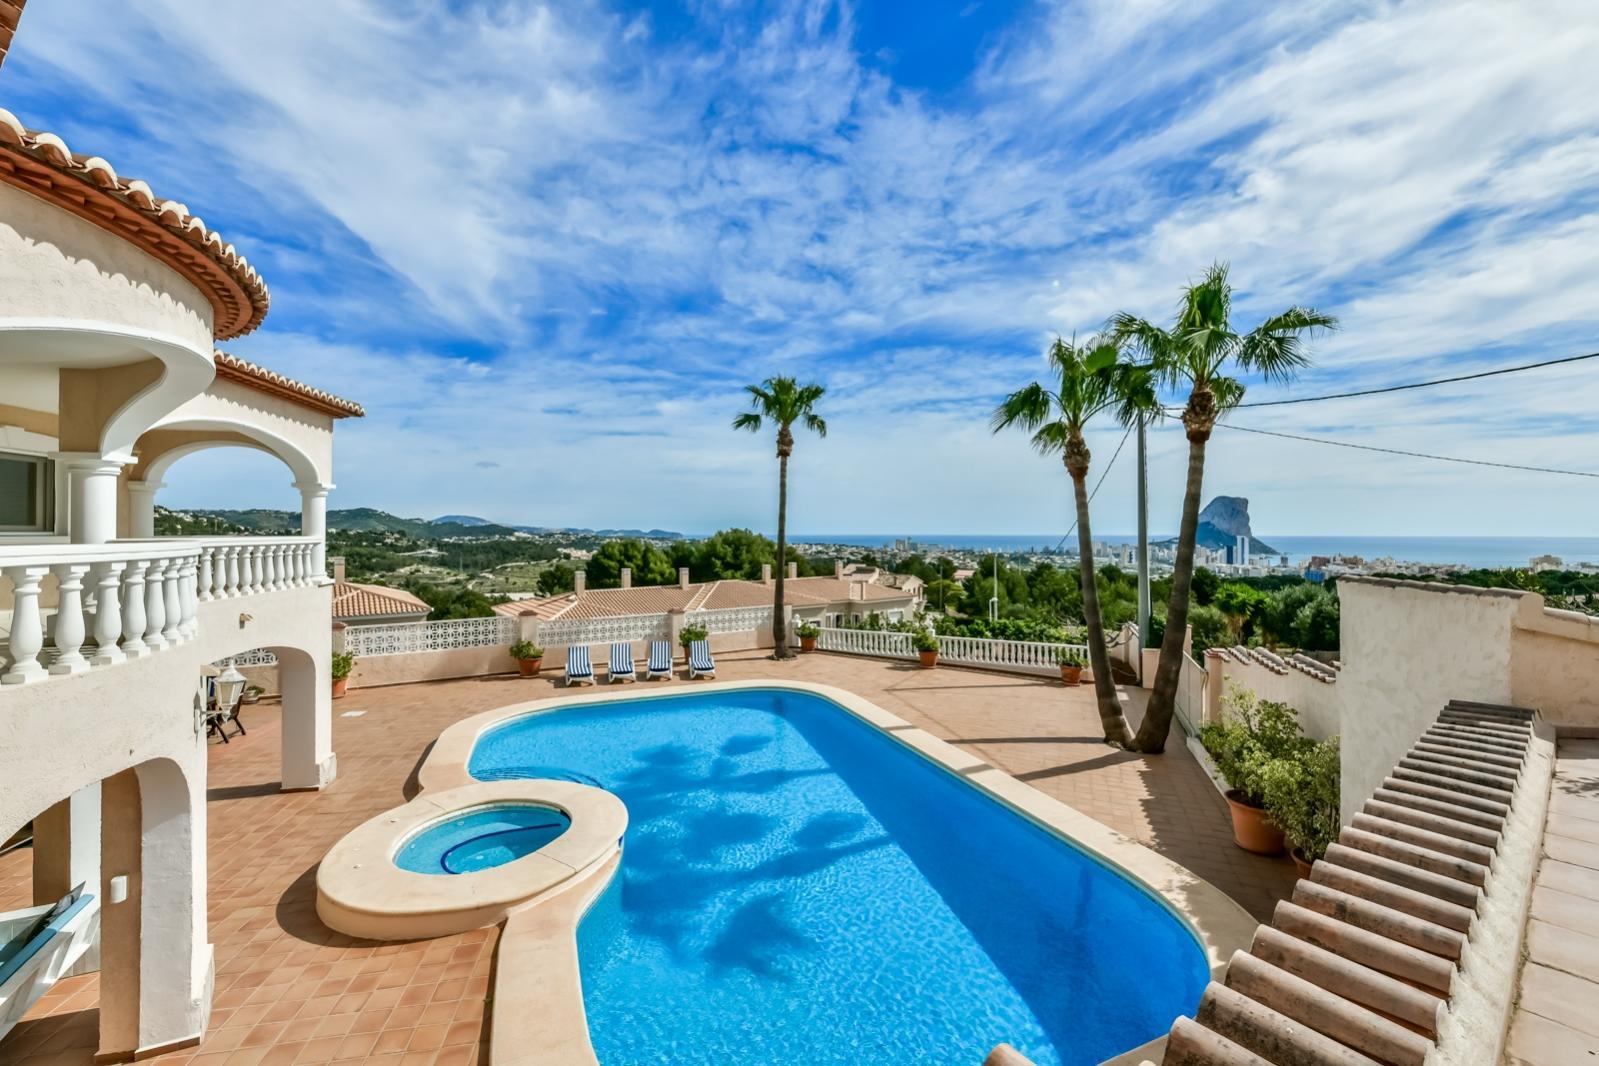 6 bedroom villa with guest apartment in Calpe